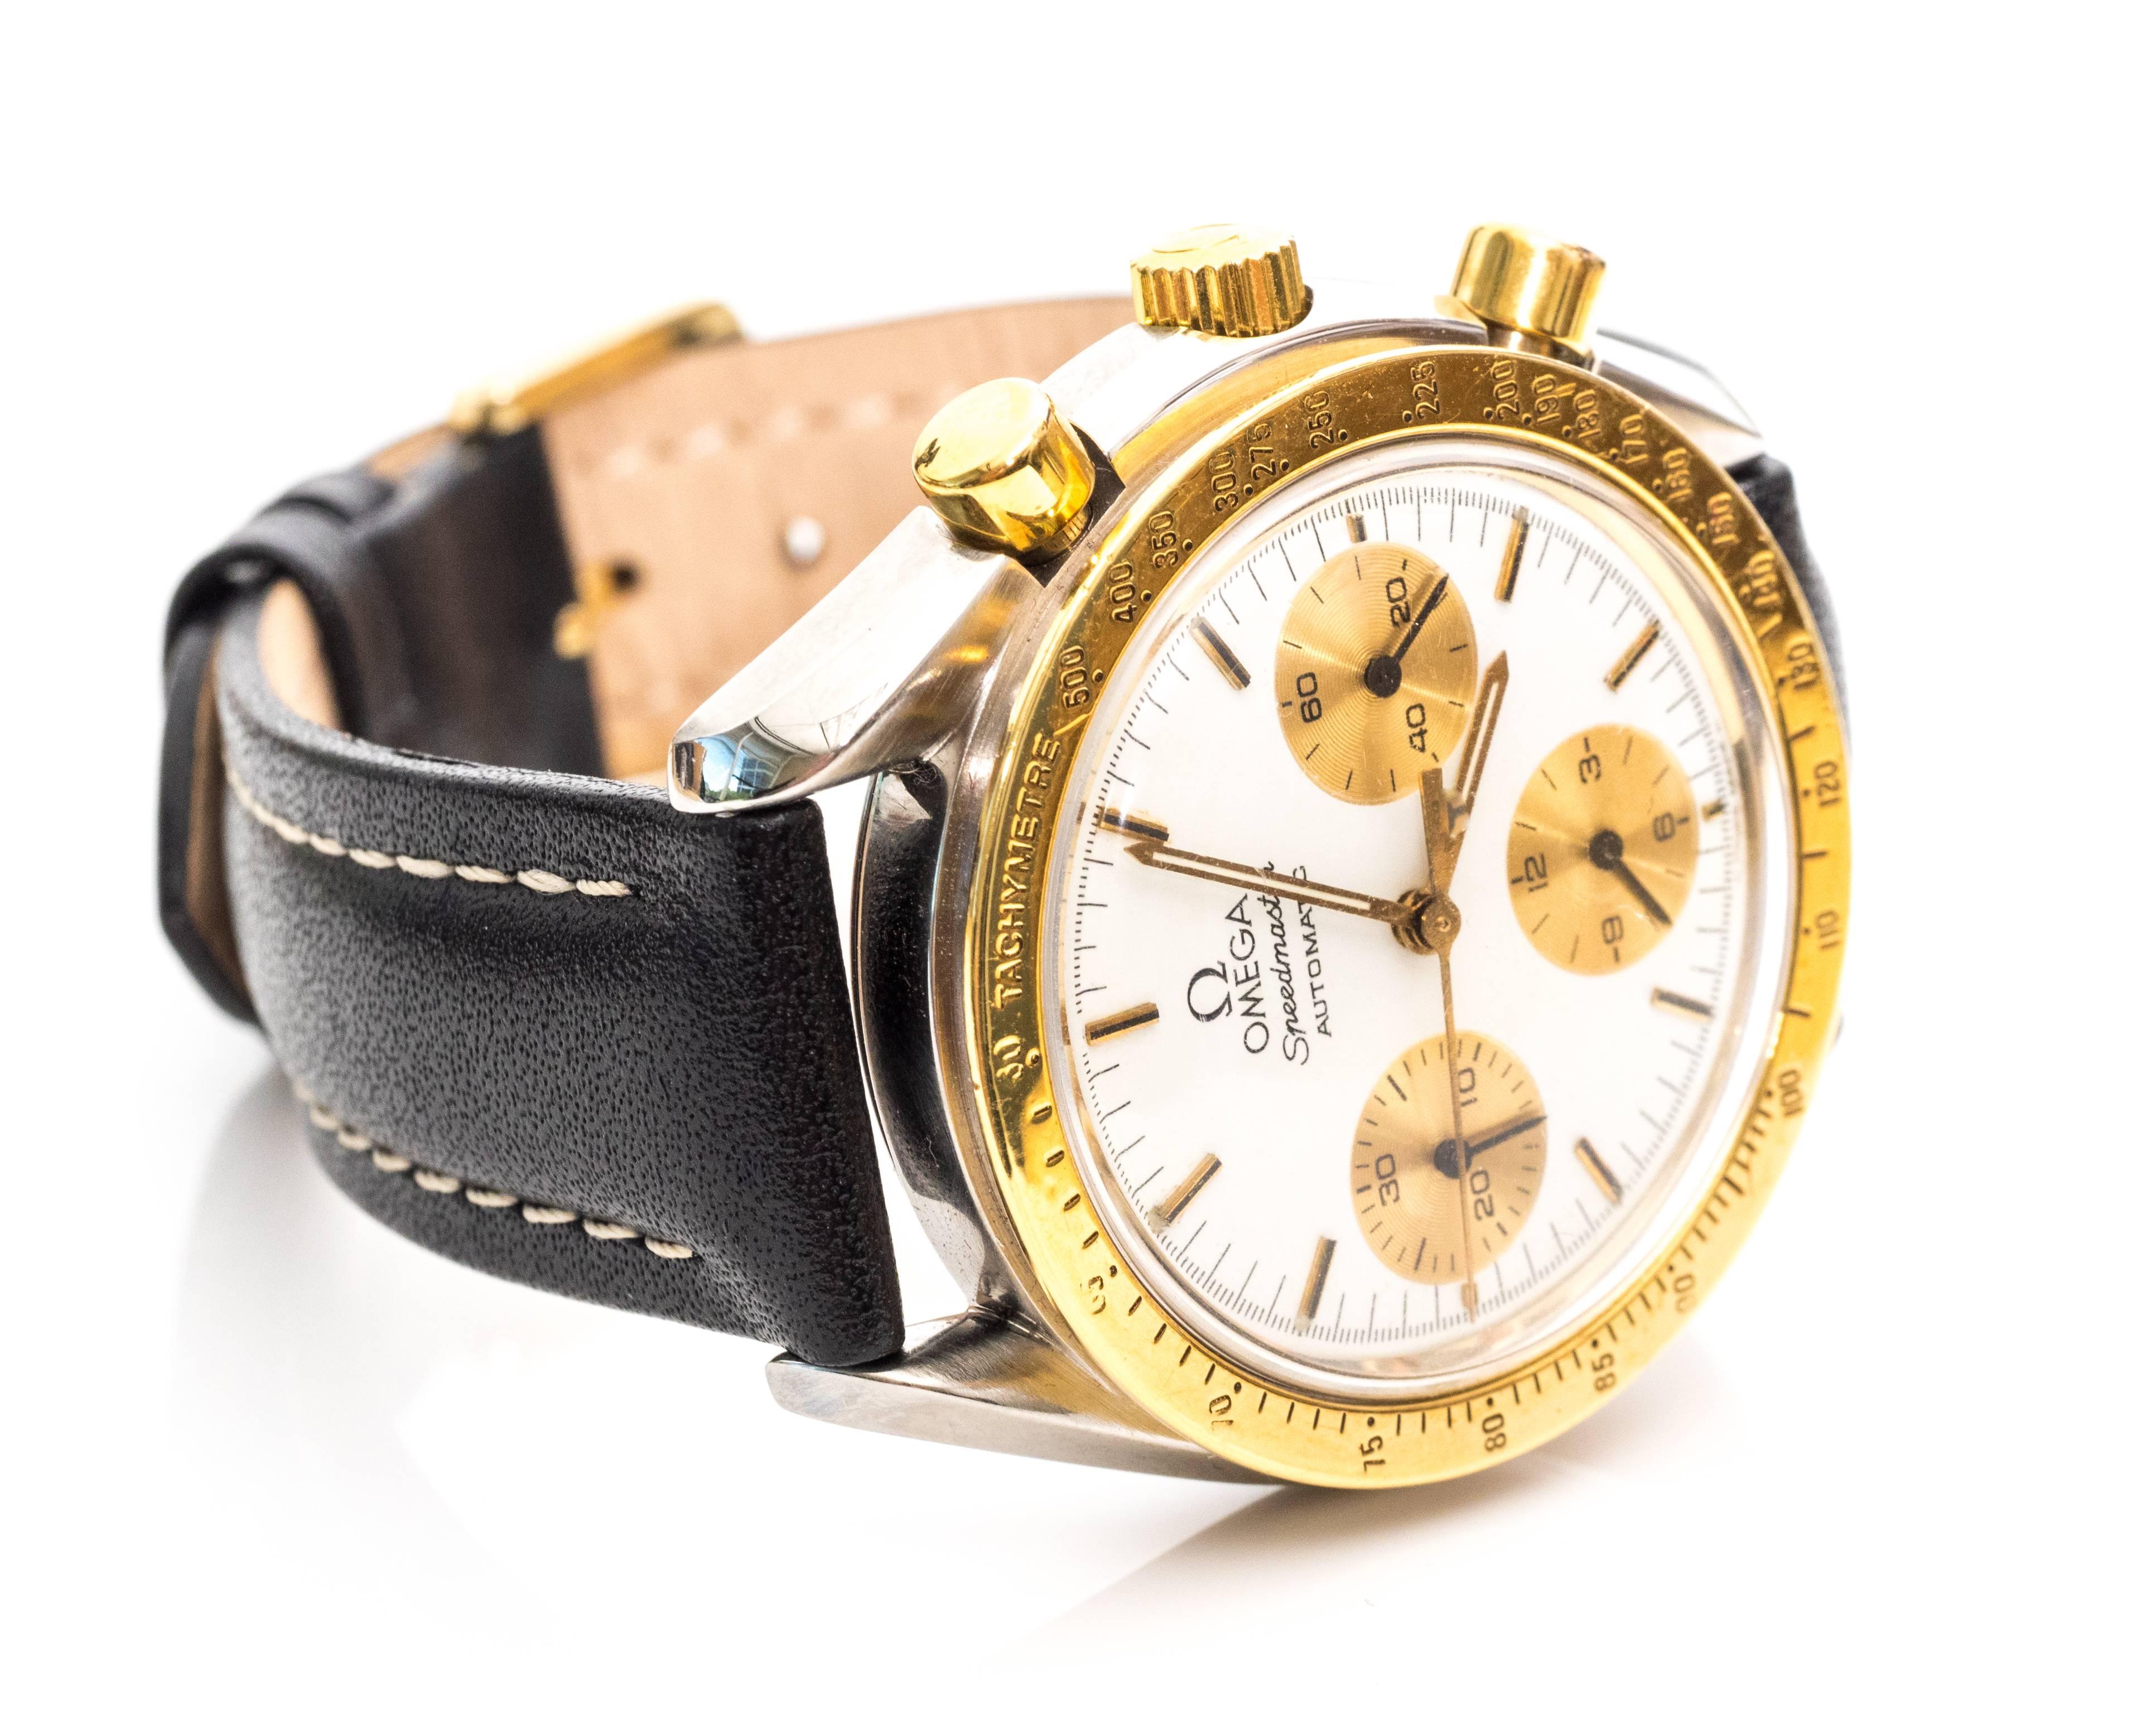 This sophisticated Omega watch is a true masterpiece! You'll be able to tell tell at any speed with its three additional chronograph dials, without having to overlook style. The yellow gold crown, pushers, registers, and hour markets pair well with